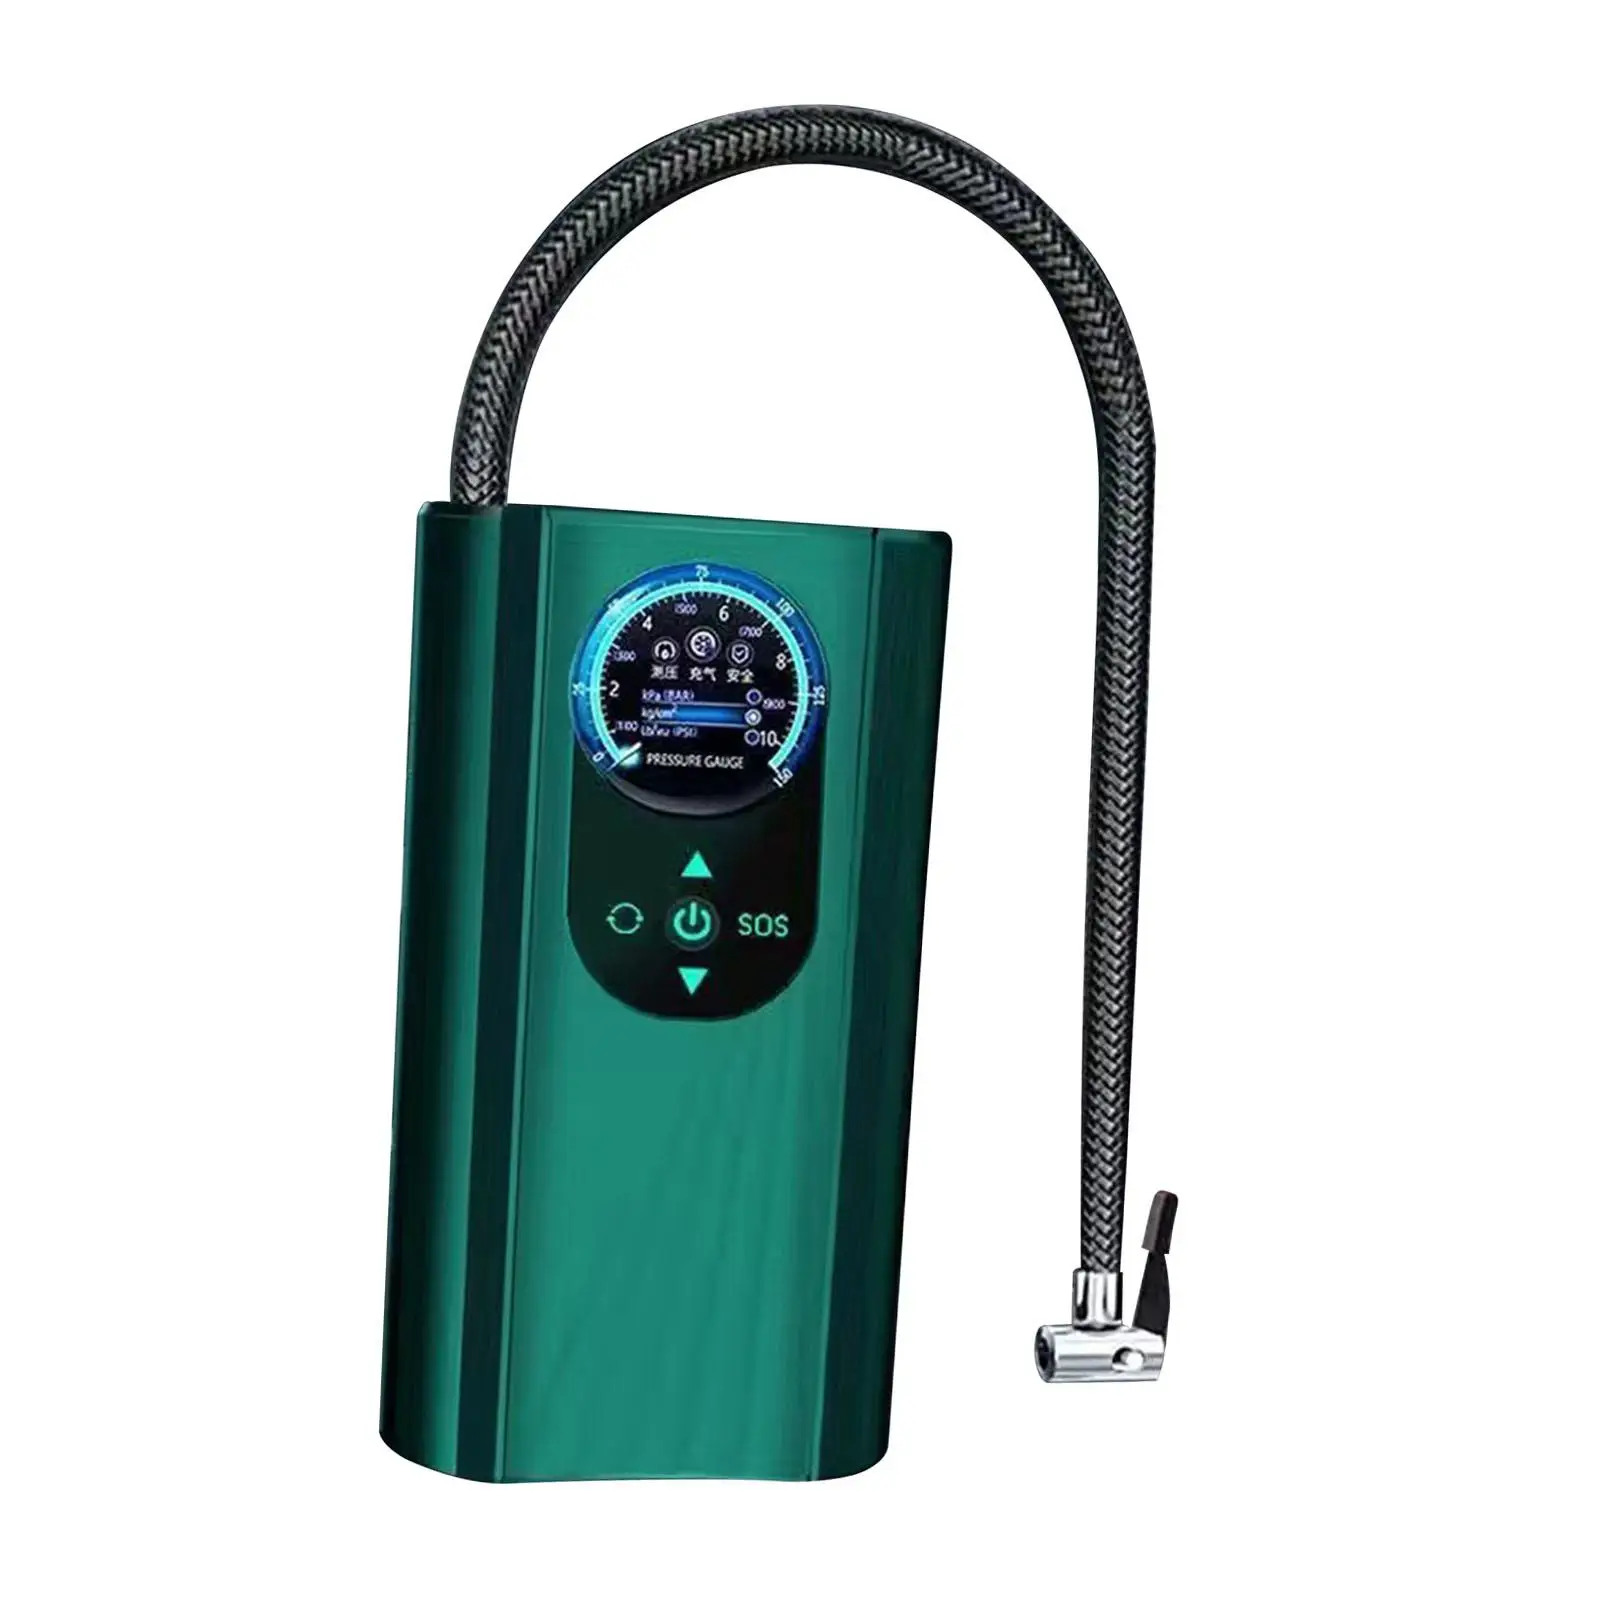 Portable Air Compressor Handheld with Pressure Gauge DC 12V Compact Air Pump Tire Inflator for Bike Car Motorcycle SUV Ball